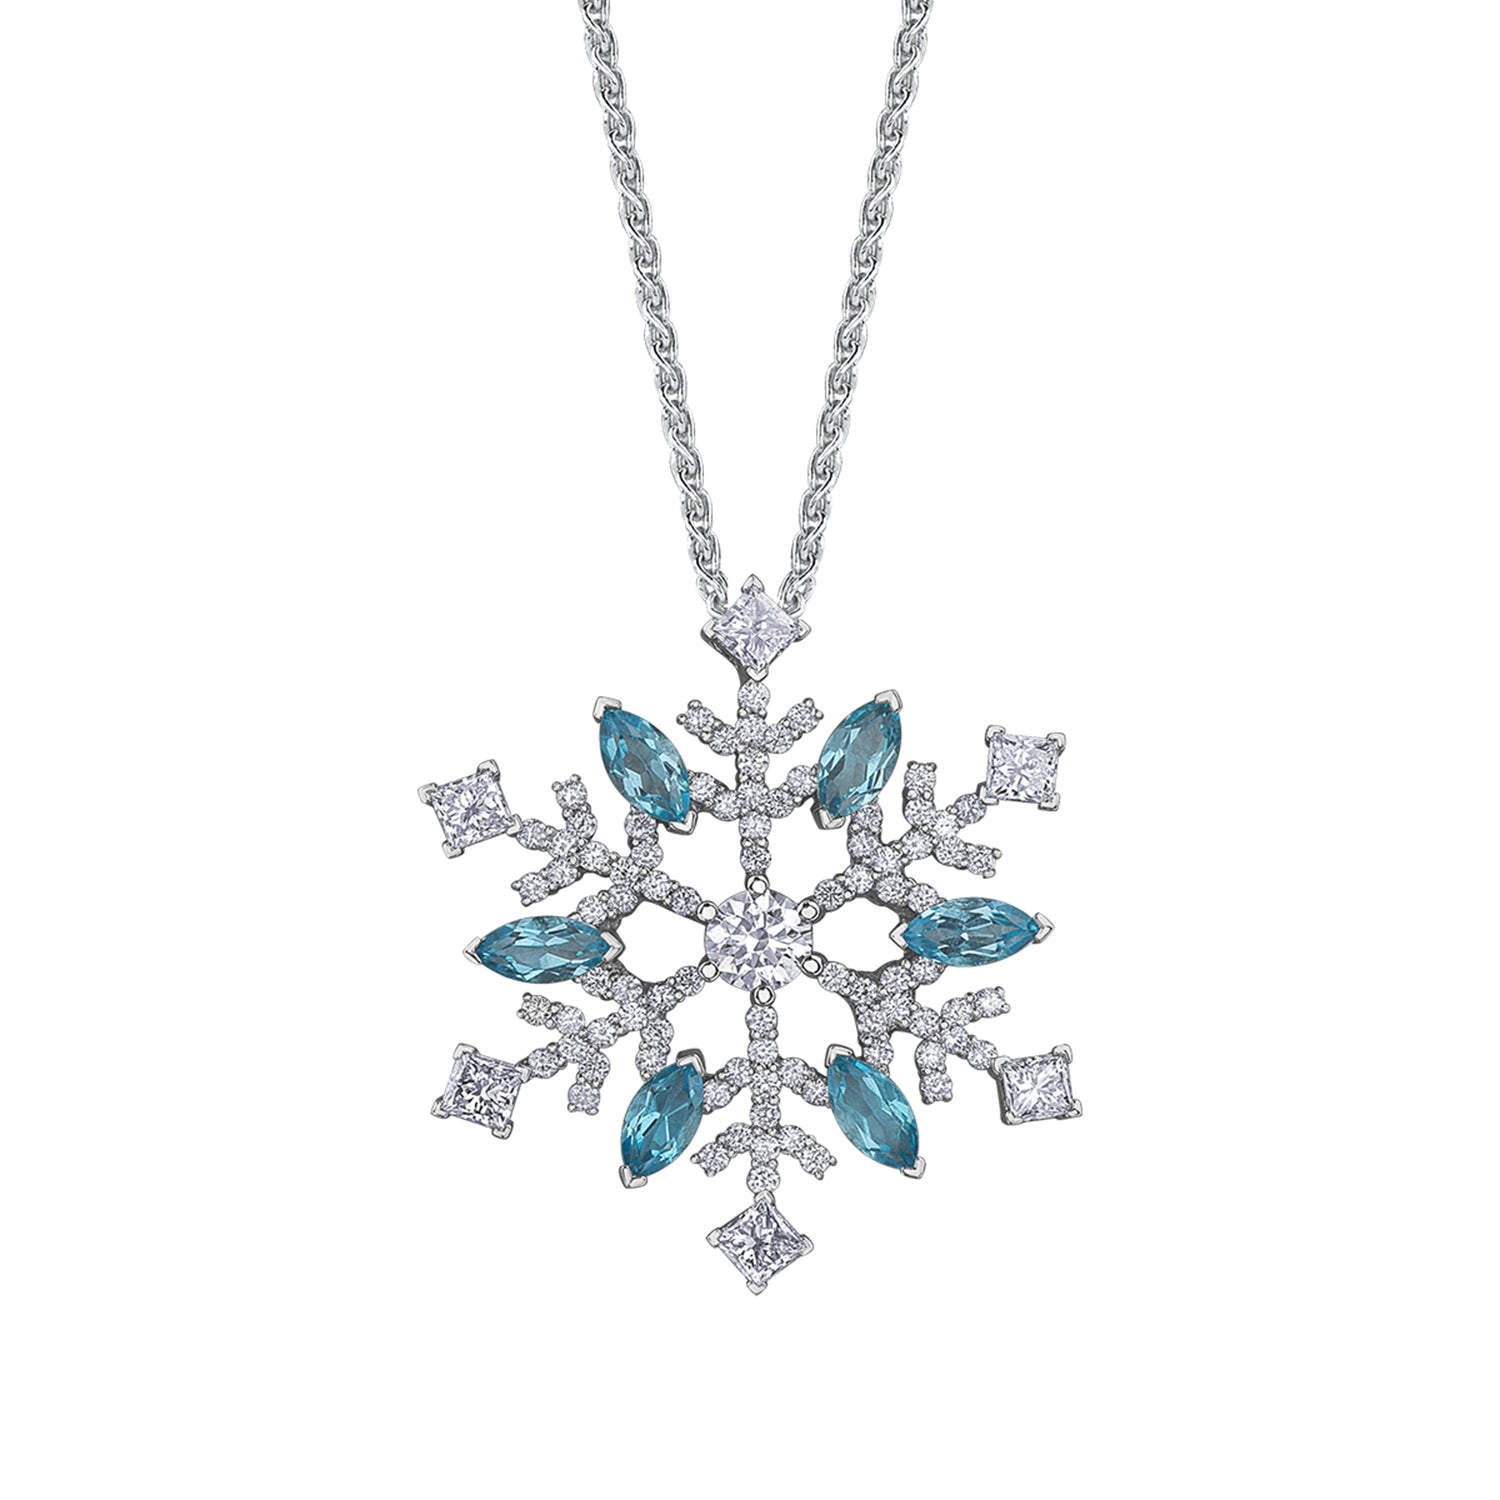 Crafted in 14KT white Certified Canadian Gold, this pendant features a snowflake set with blue topaz and round brilliant-cut Canadian diamonds.